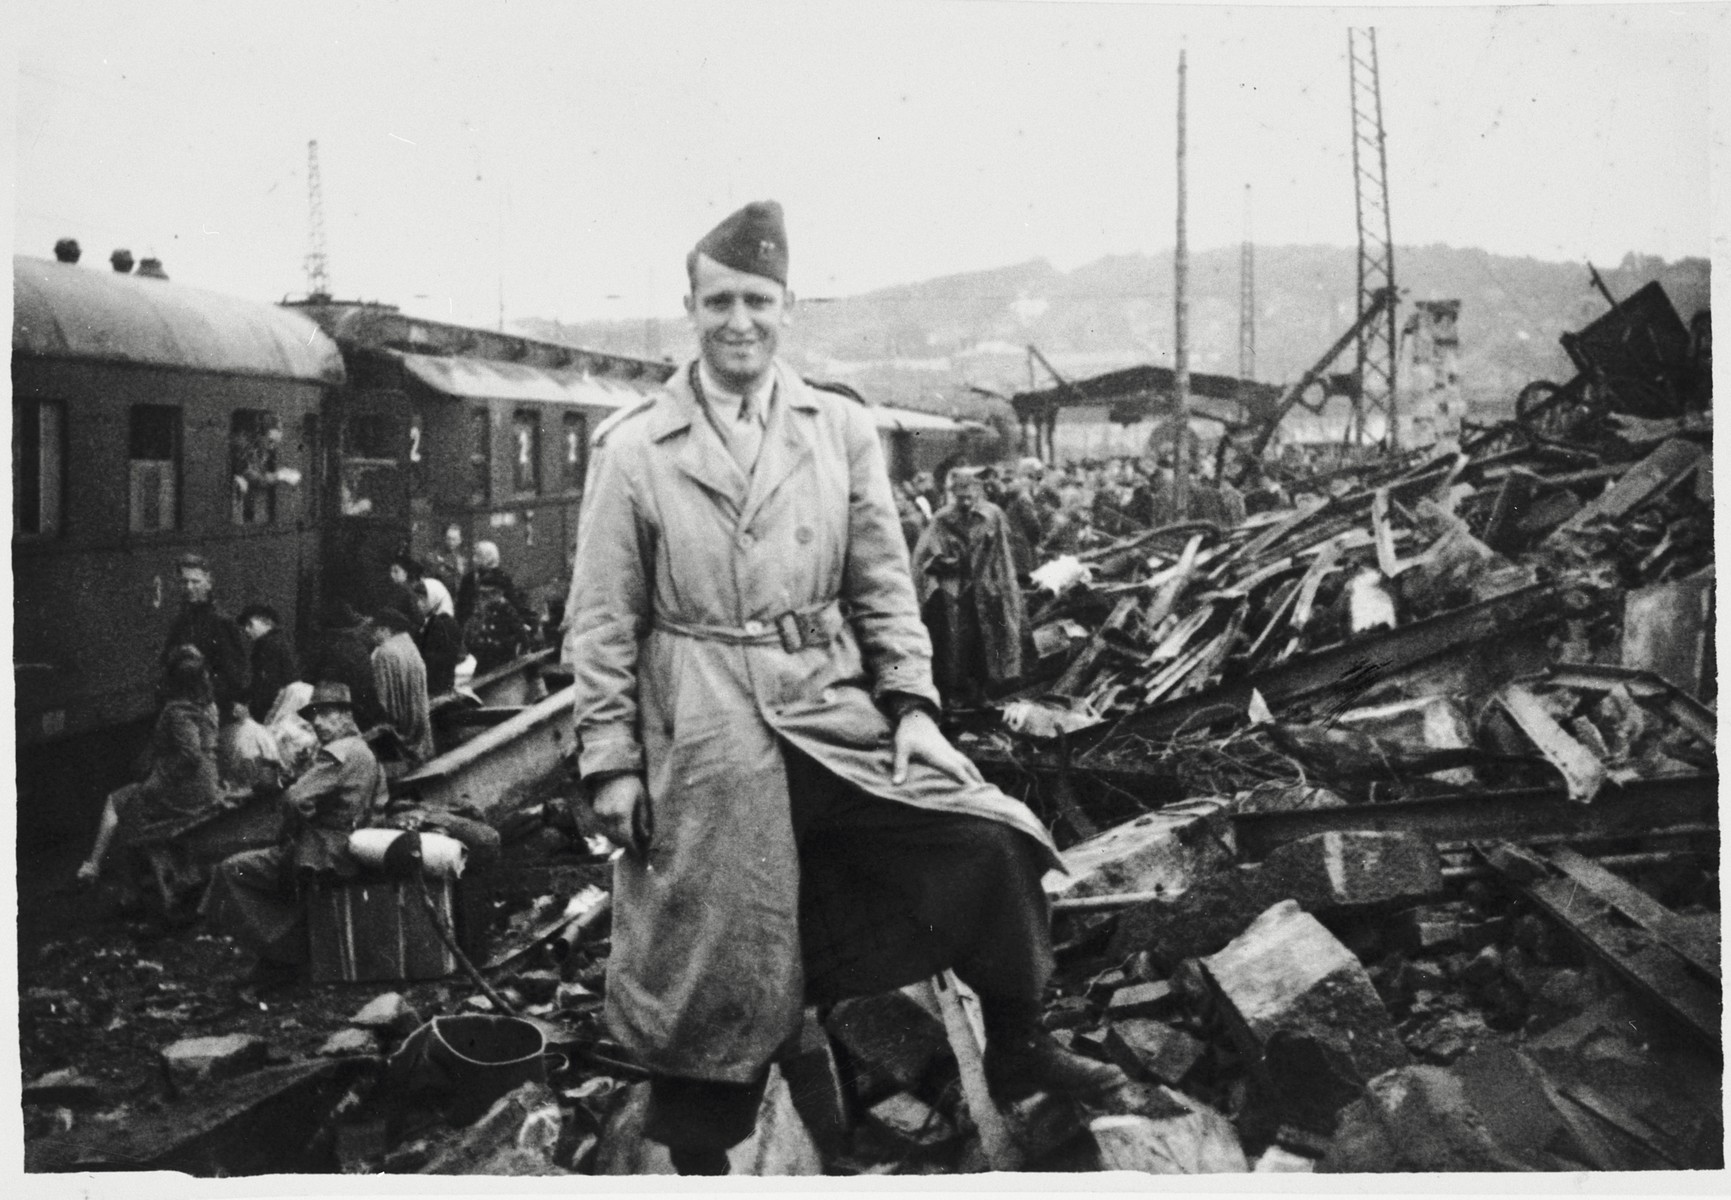 An American soldier poses next to a huge pile of rubble alongside a railroad after the war.